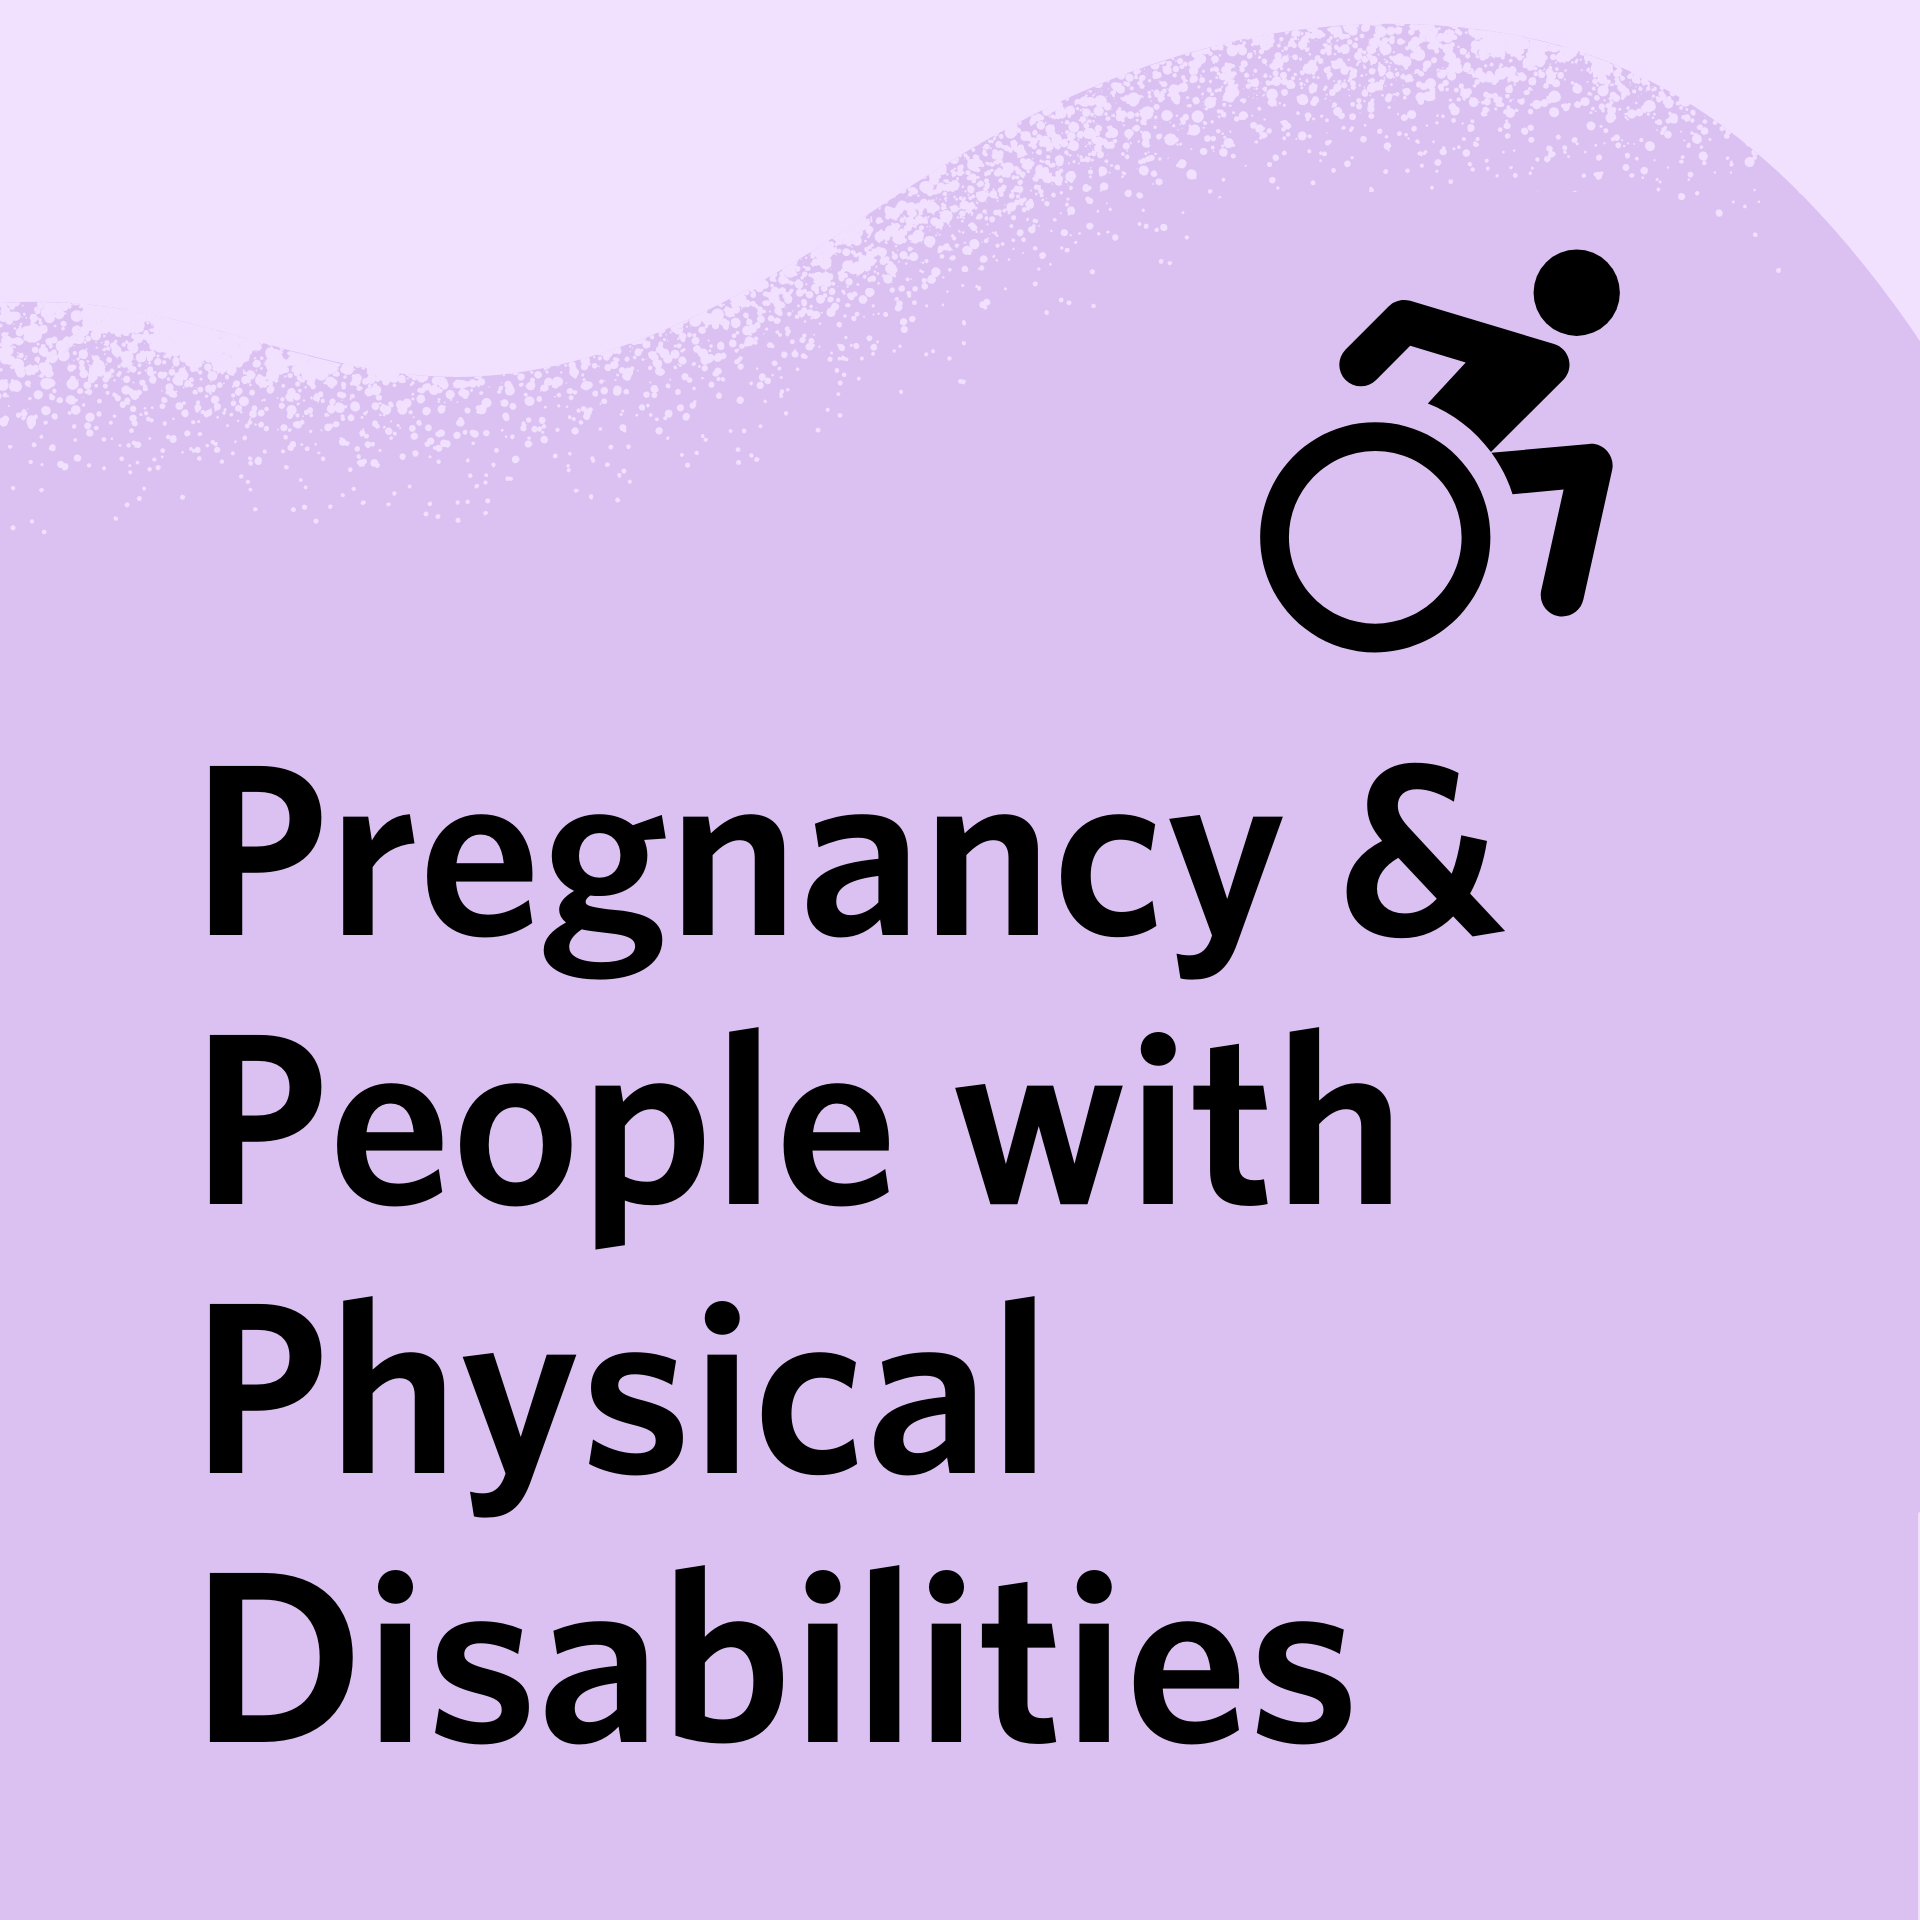 Pregnancy & People with Physical Disabilities